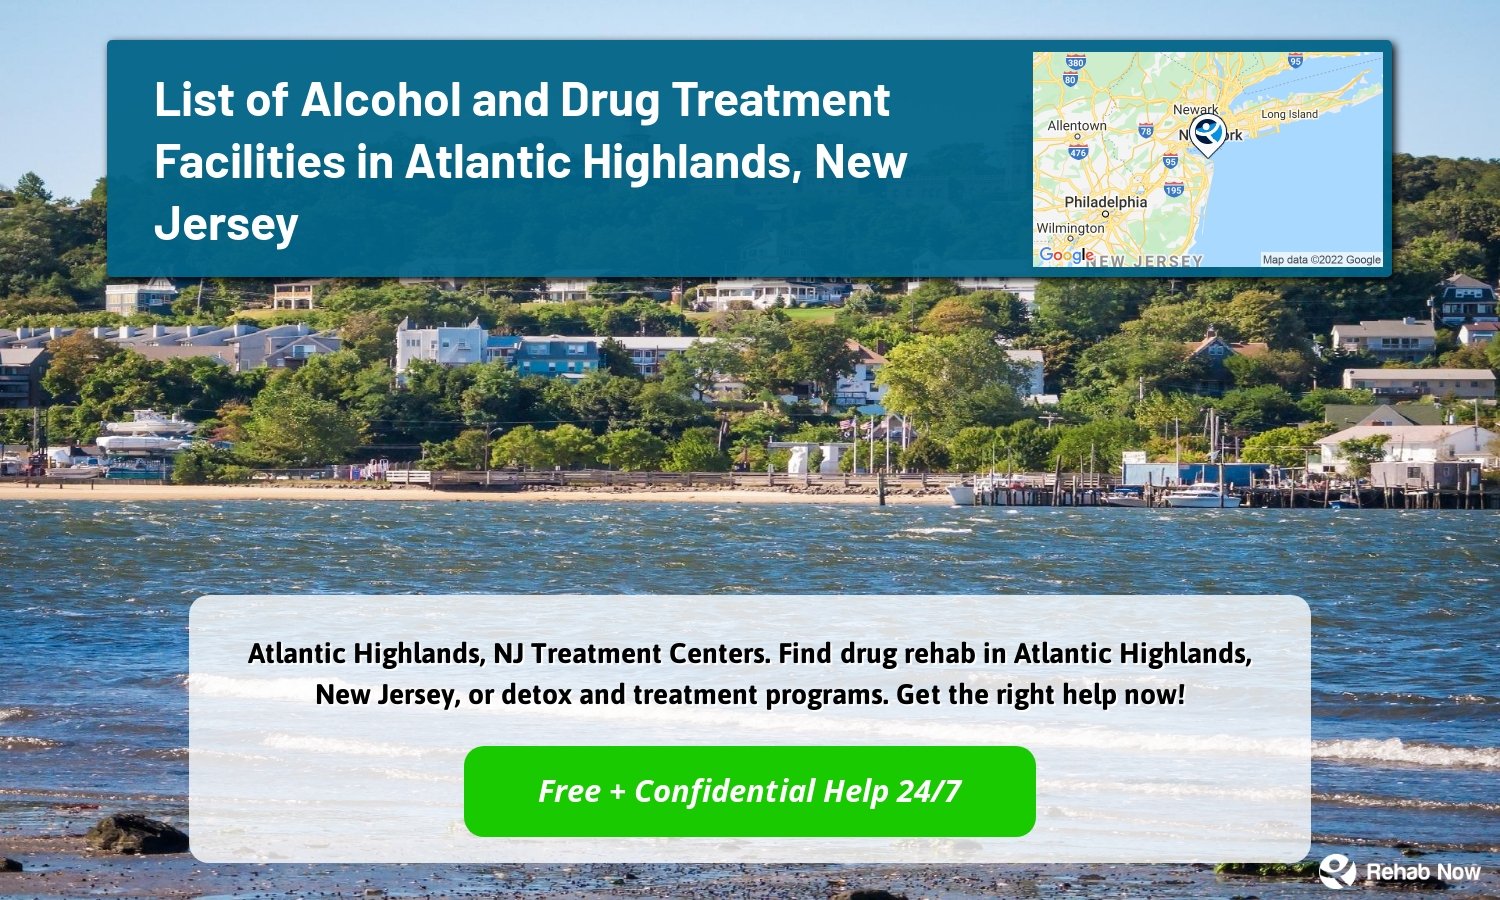 Atlantic Highlands, NJ Treatment Centers. Find drug rehab in Atlantic Highlands, New Jersey, or detox and treatment programs. Get the right help now!